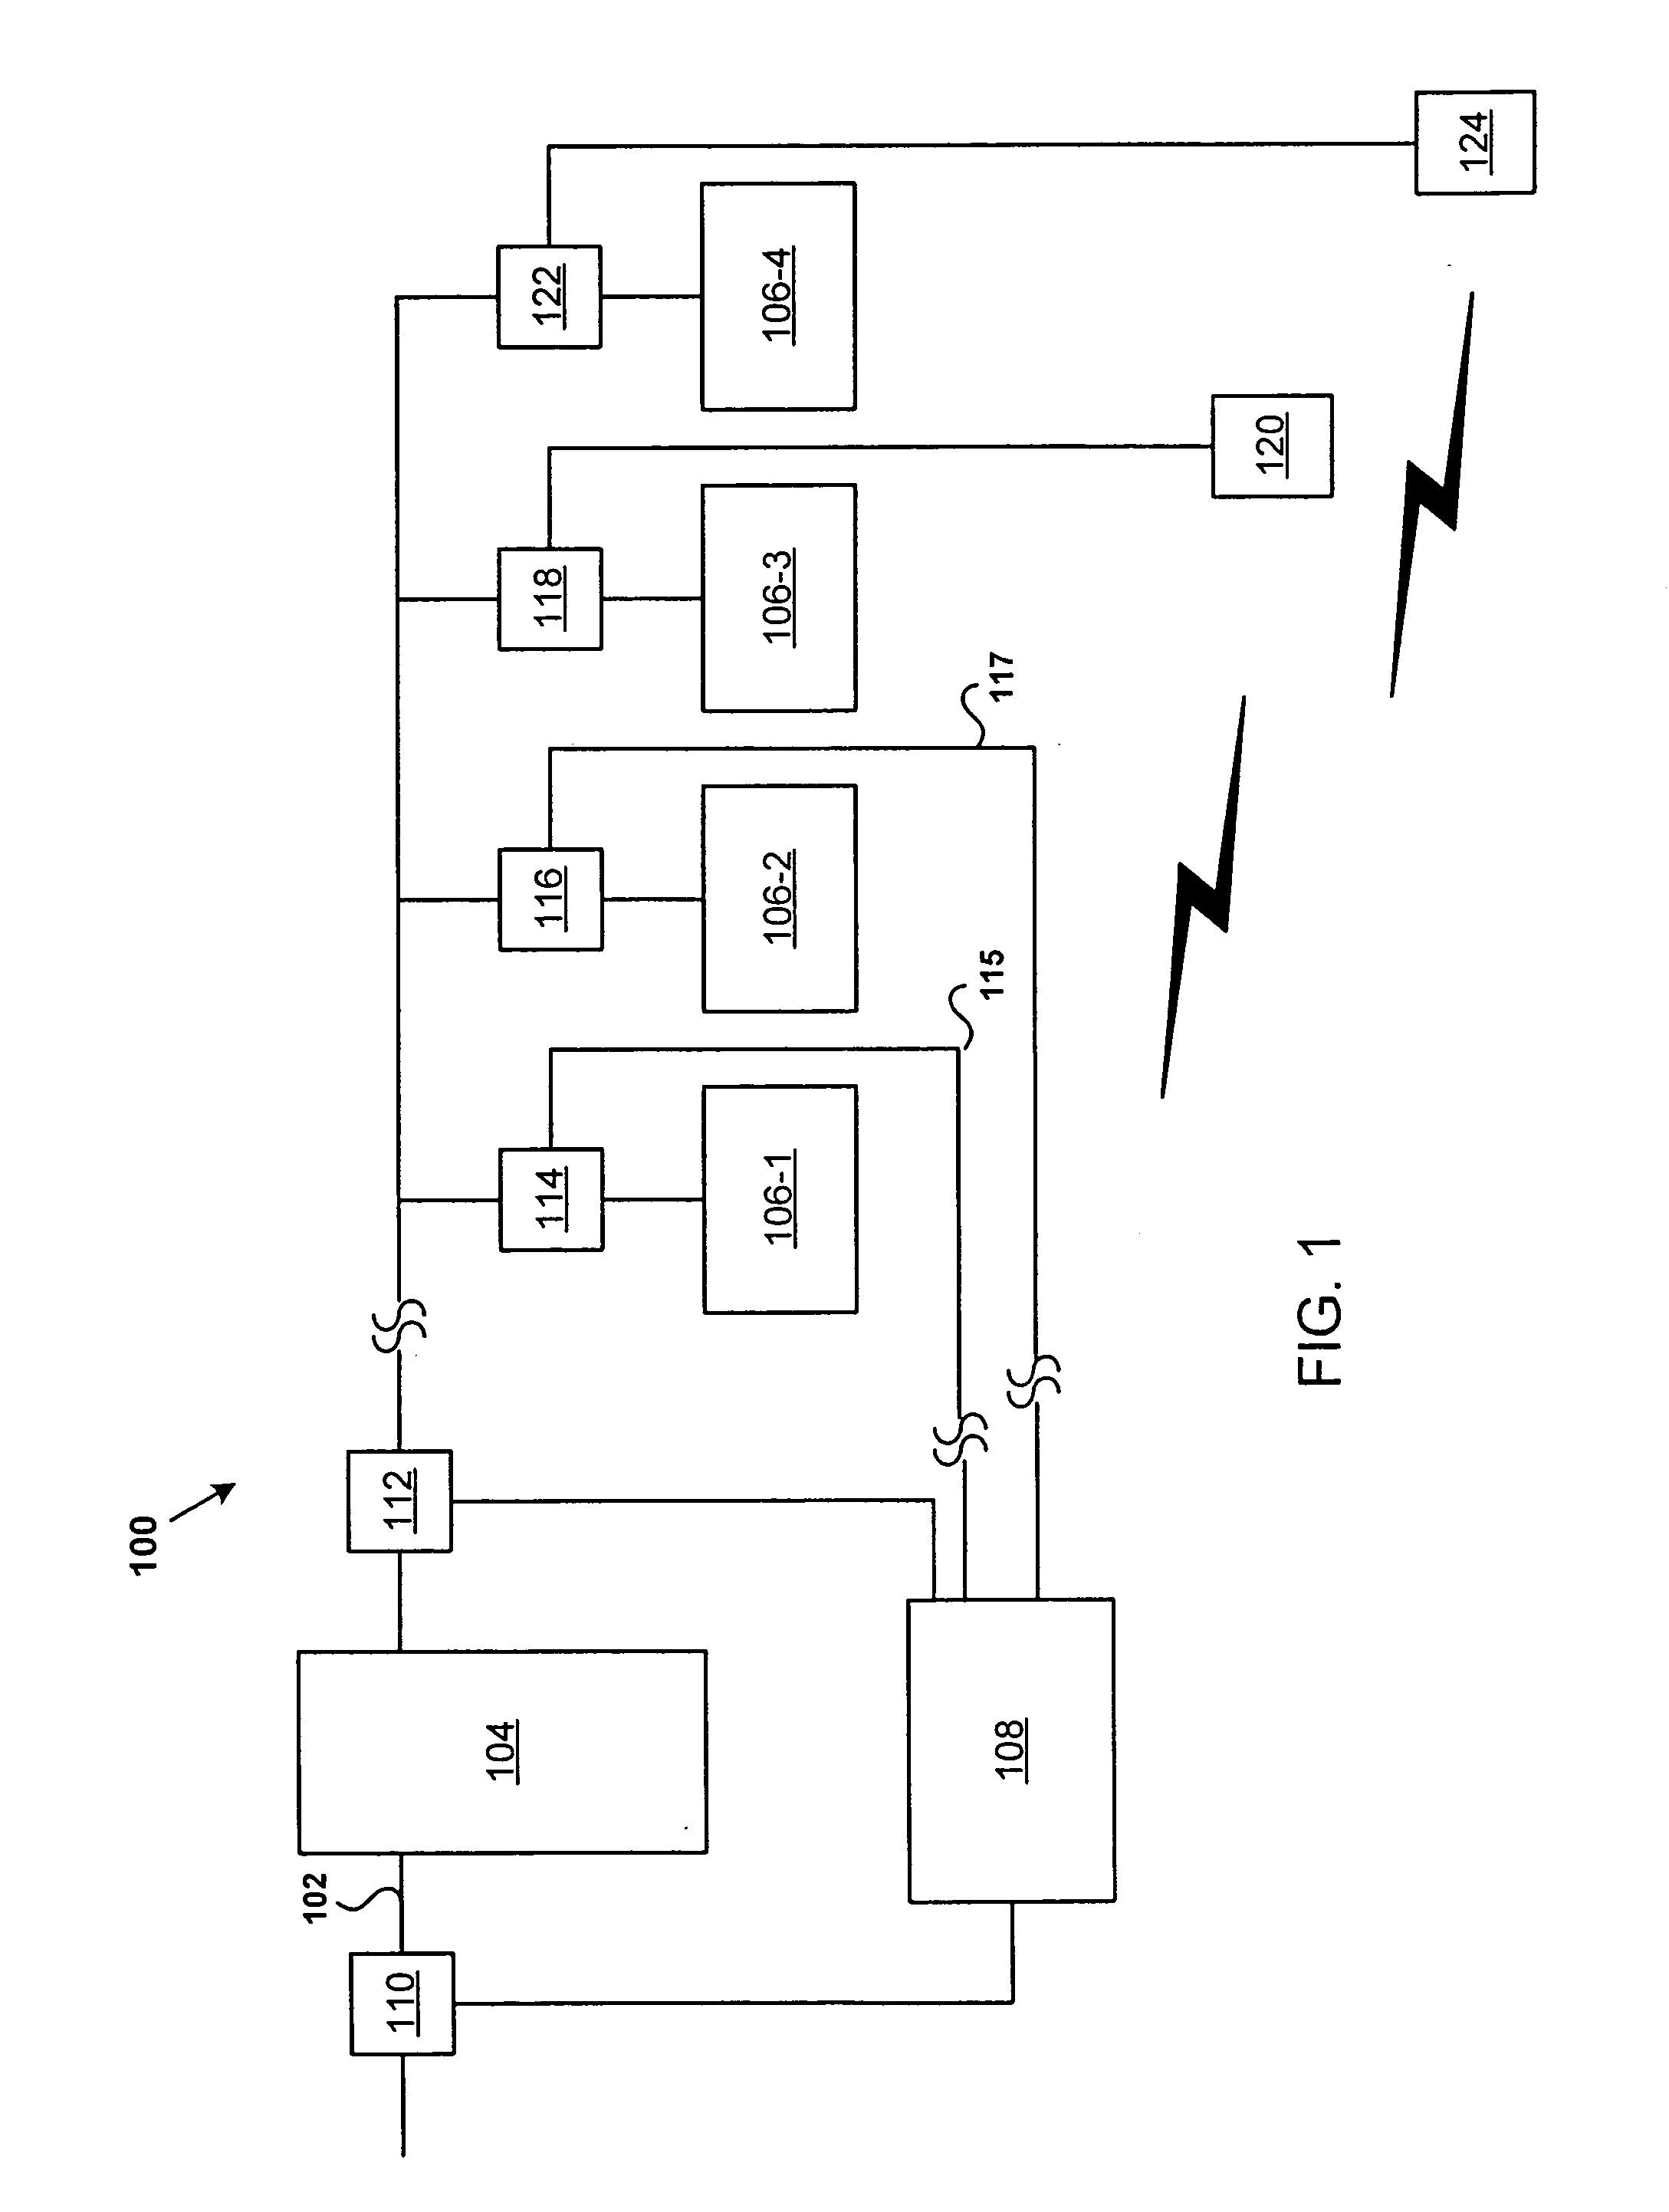 Remote electrical power monitoring systems and methods